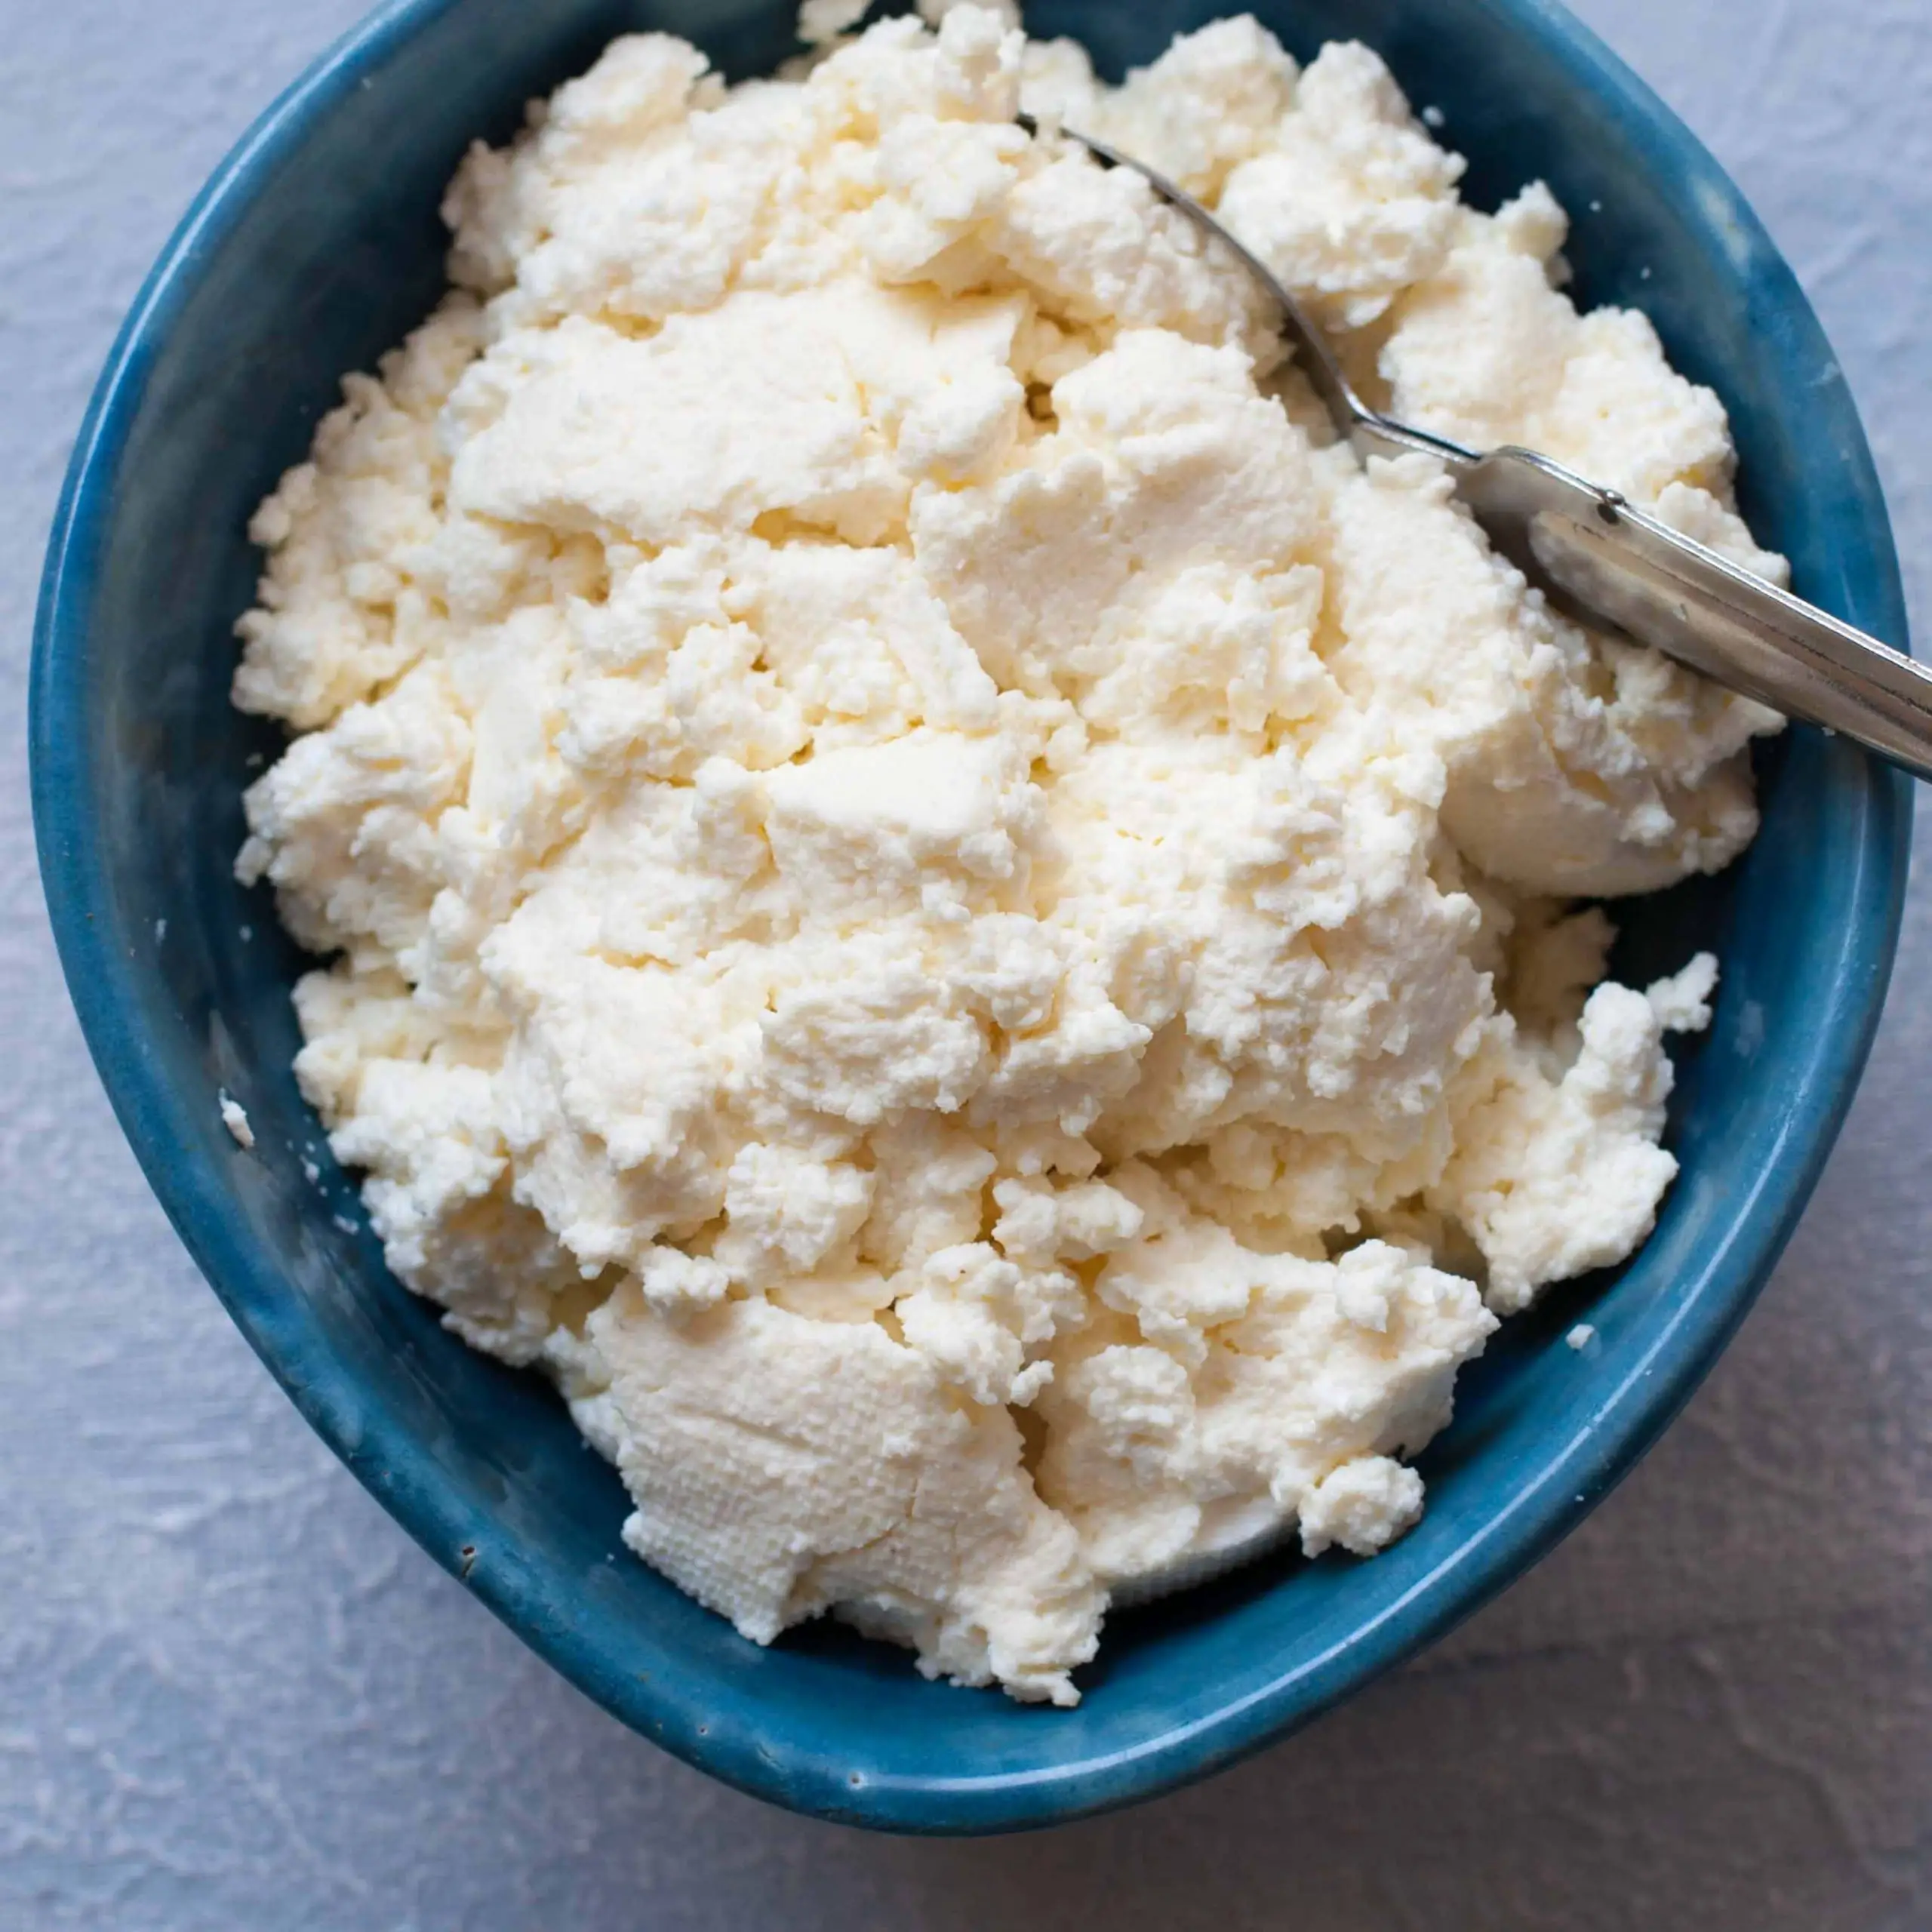 How to Make Ricotta Cheese at home from scratch